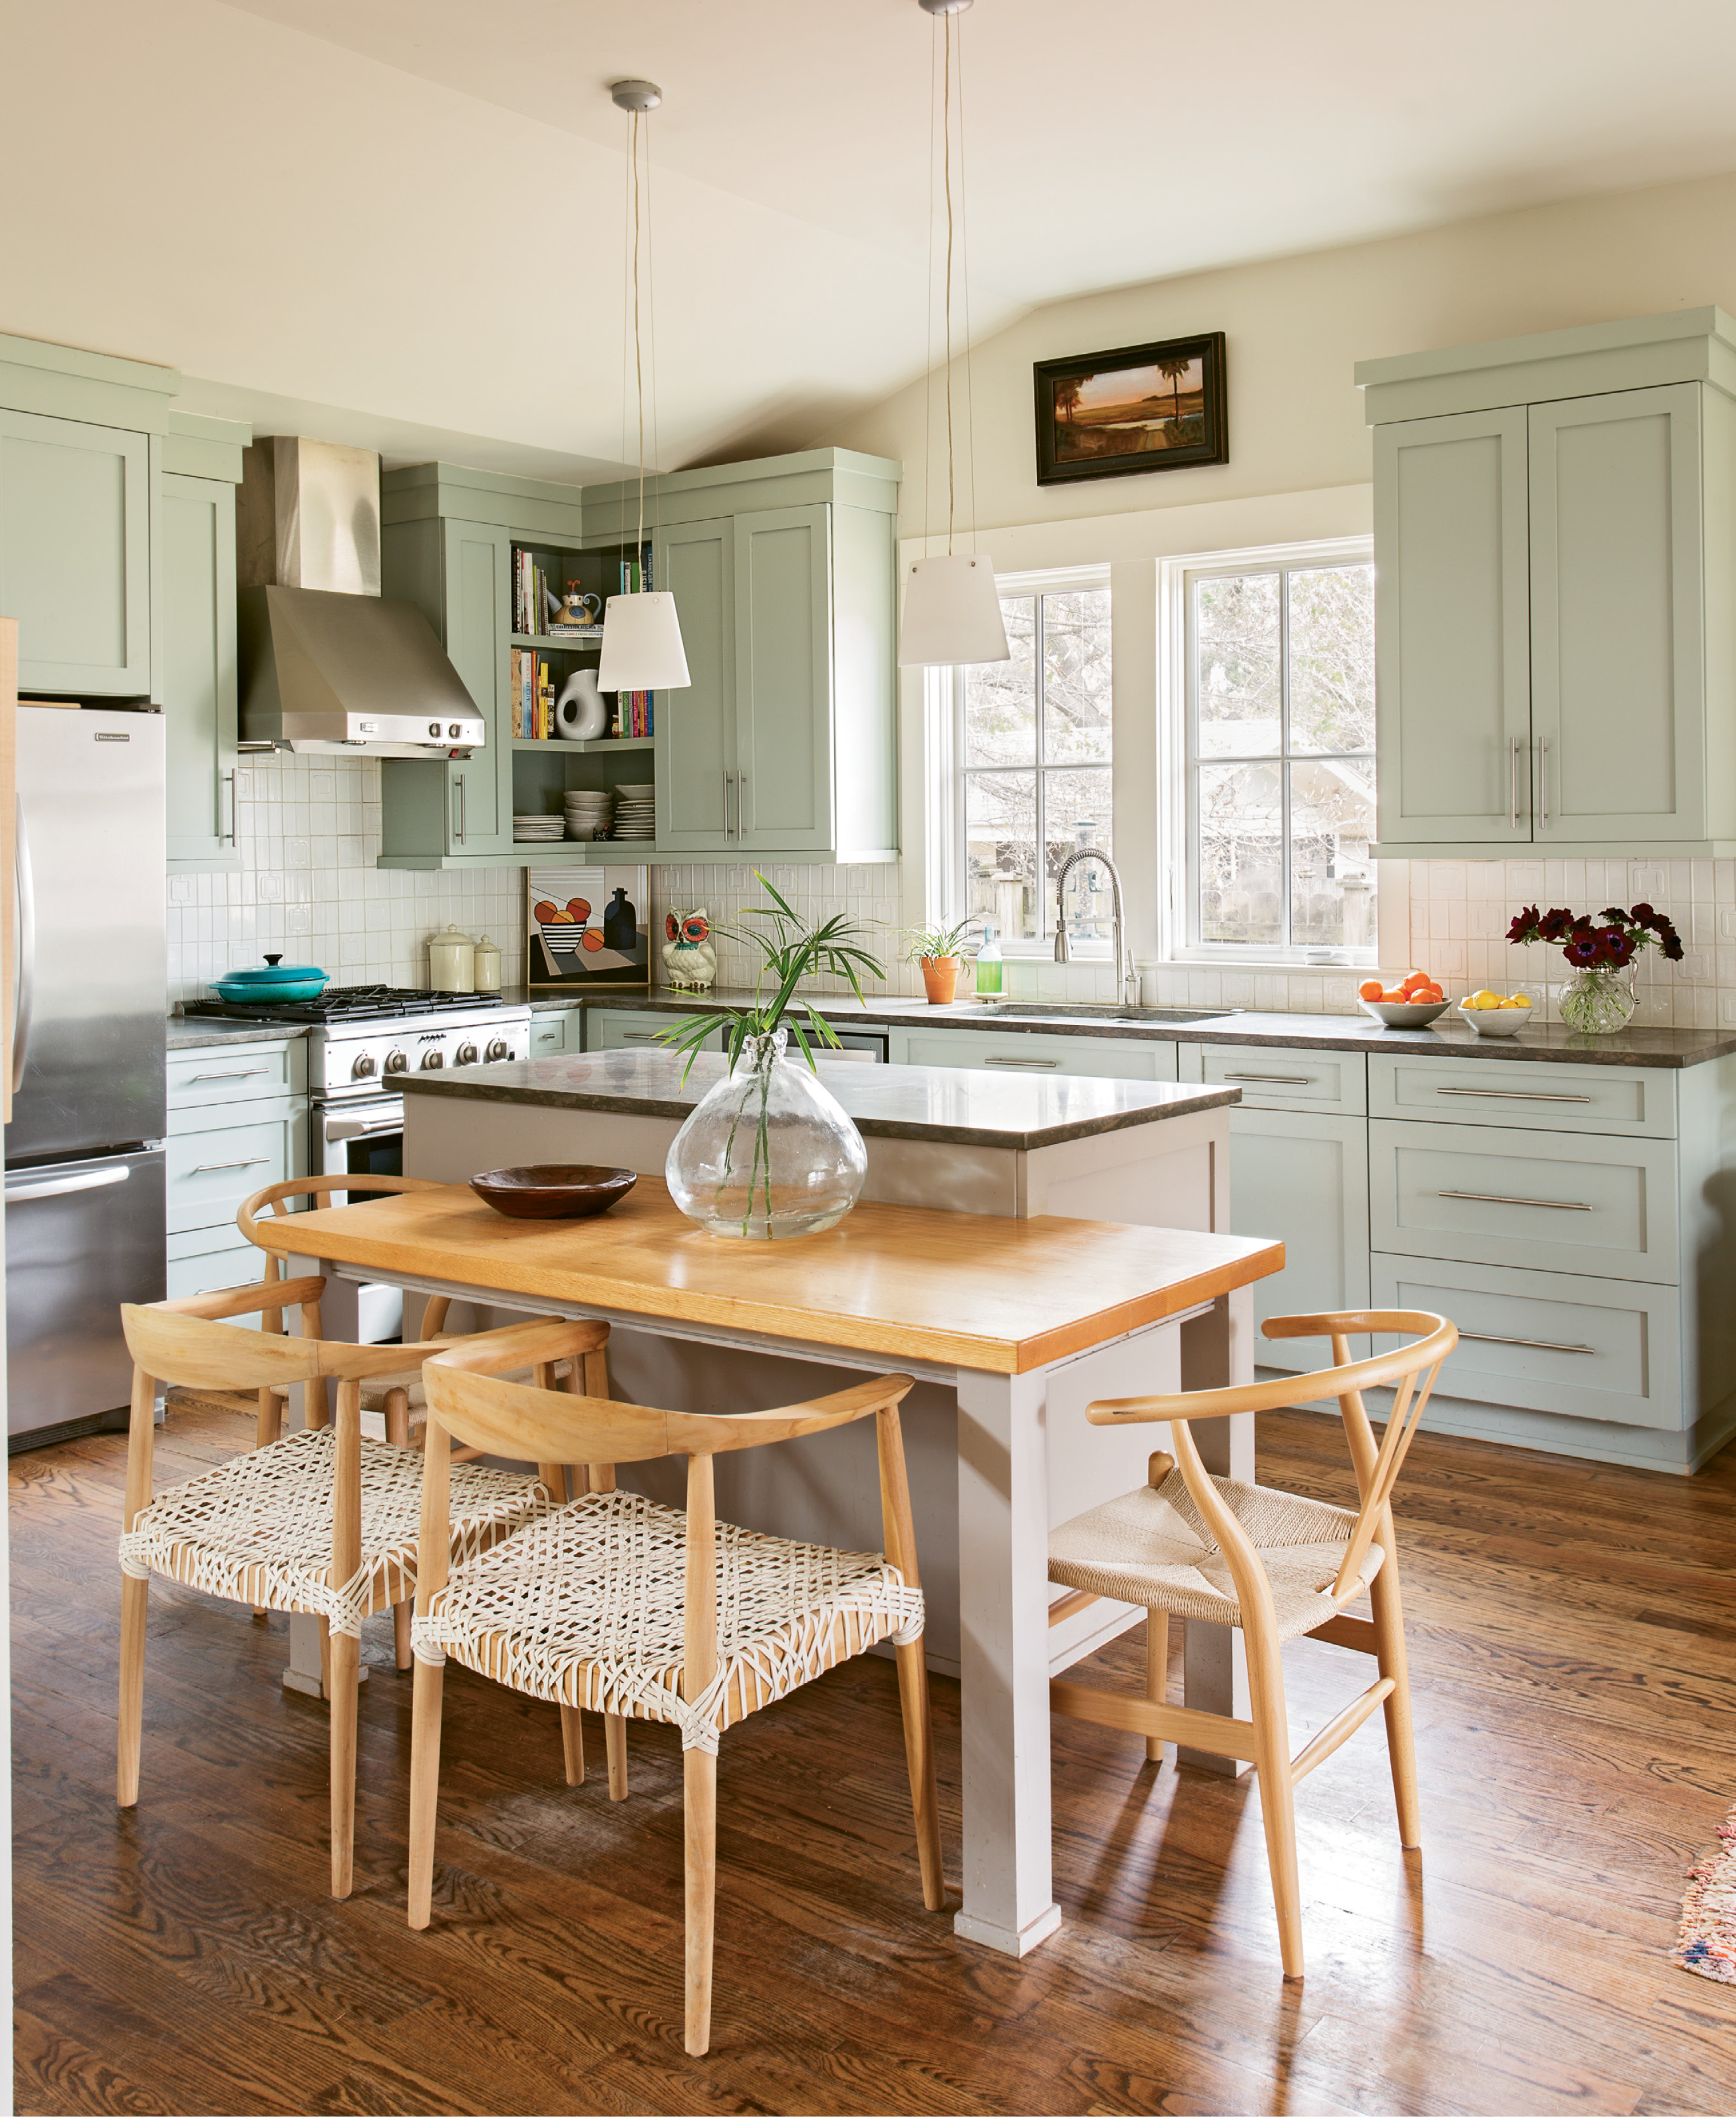 Clean Eating: In the kitchen, area carpenter Robert Buxton built the custom asymmetrical table, which adds a contemporary design element as well as an informal space for the family to gather for meals.